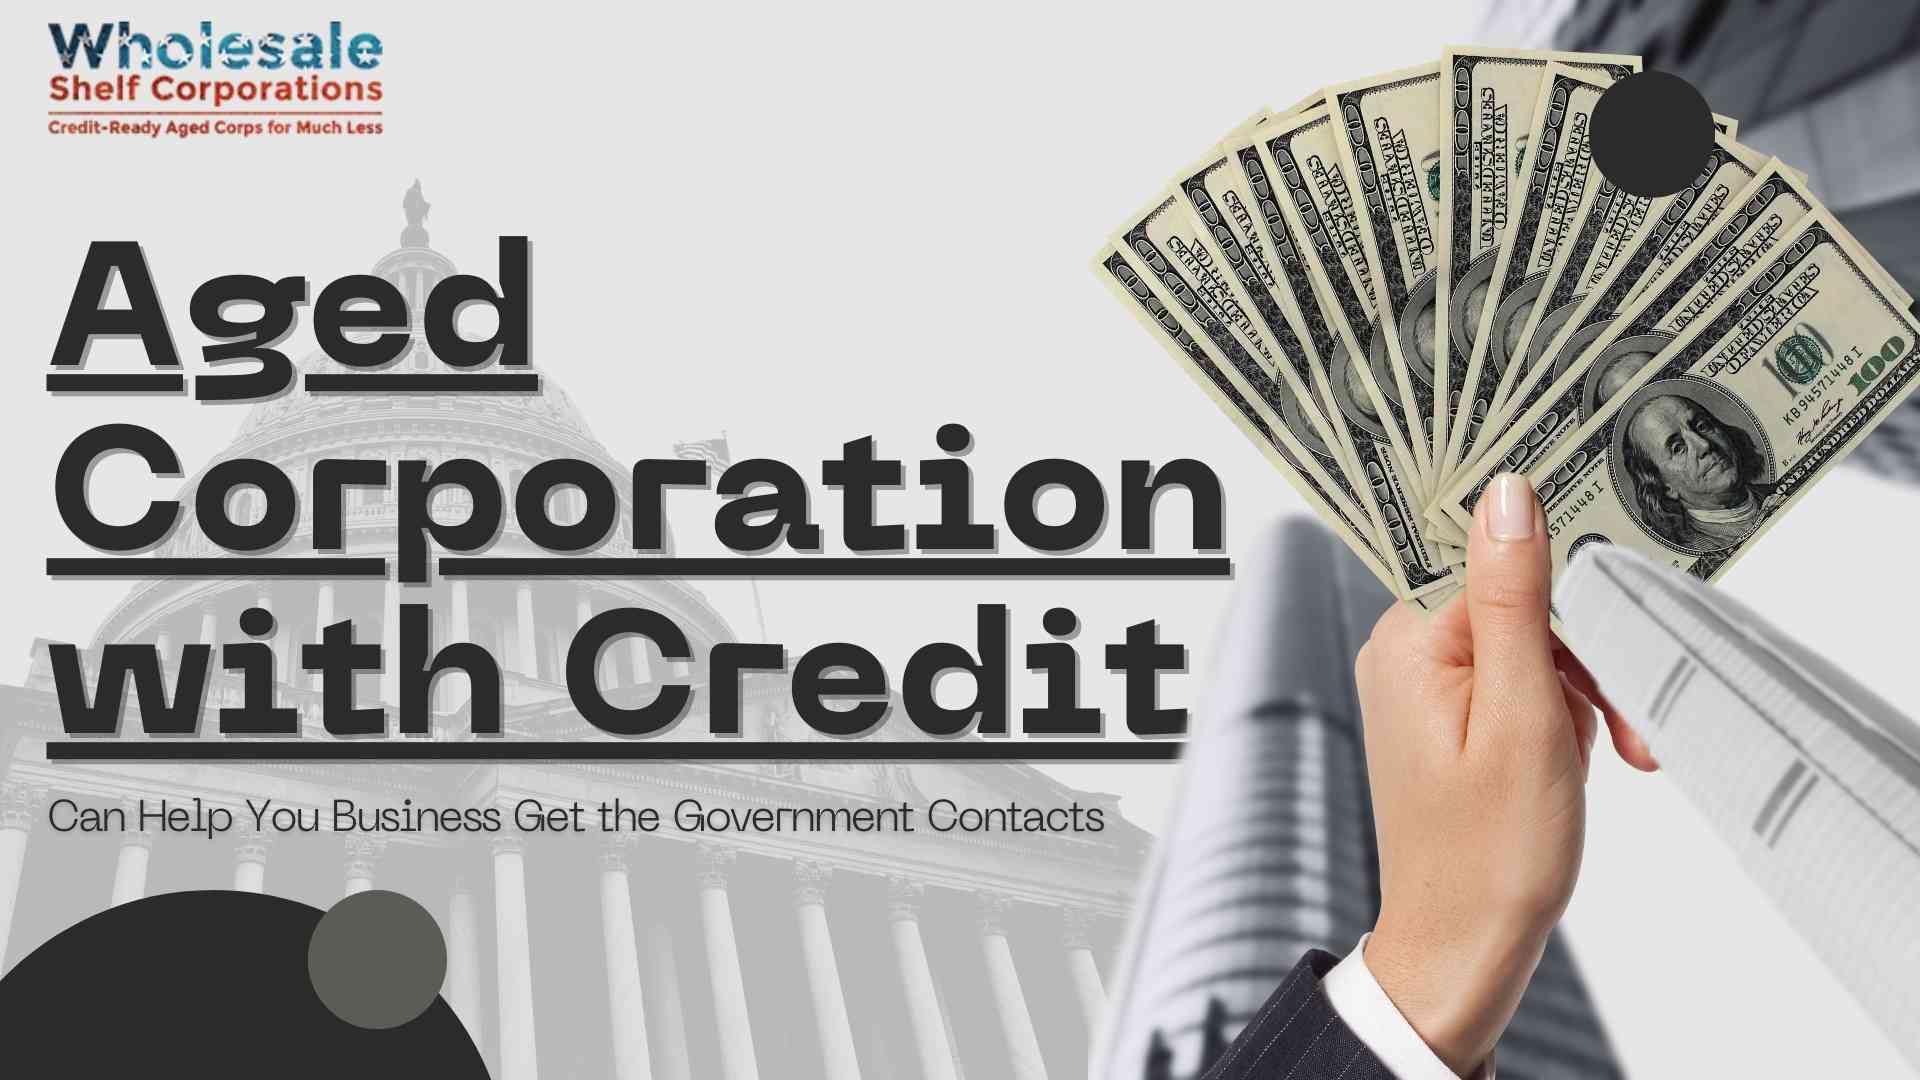 Aged Corporation with Credit Can Help You Business Get the Government Contacts